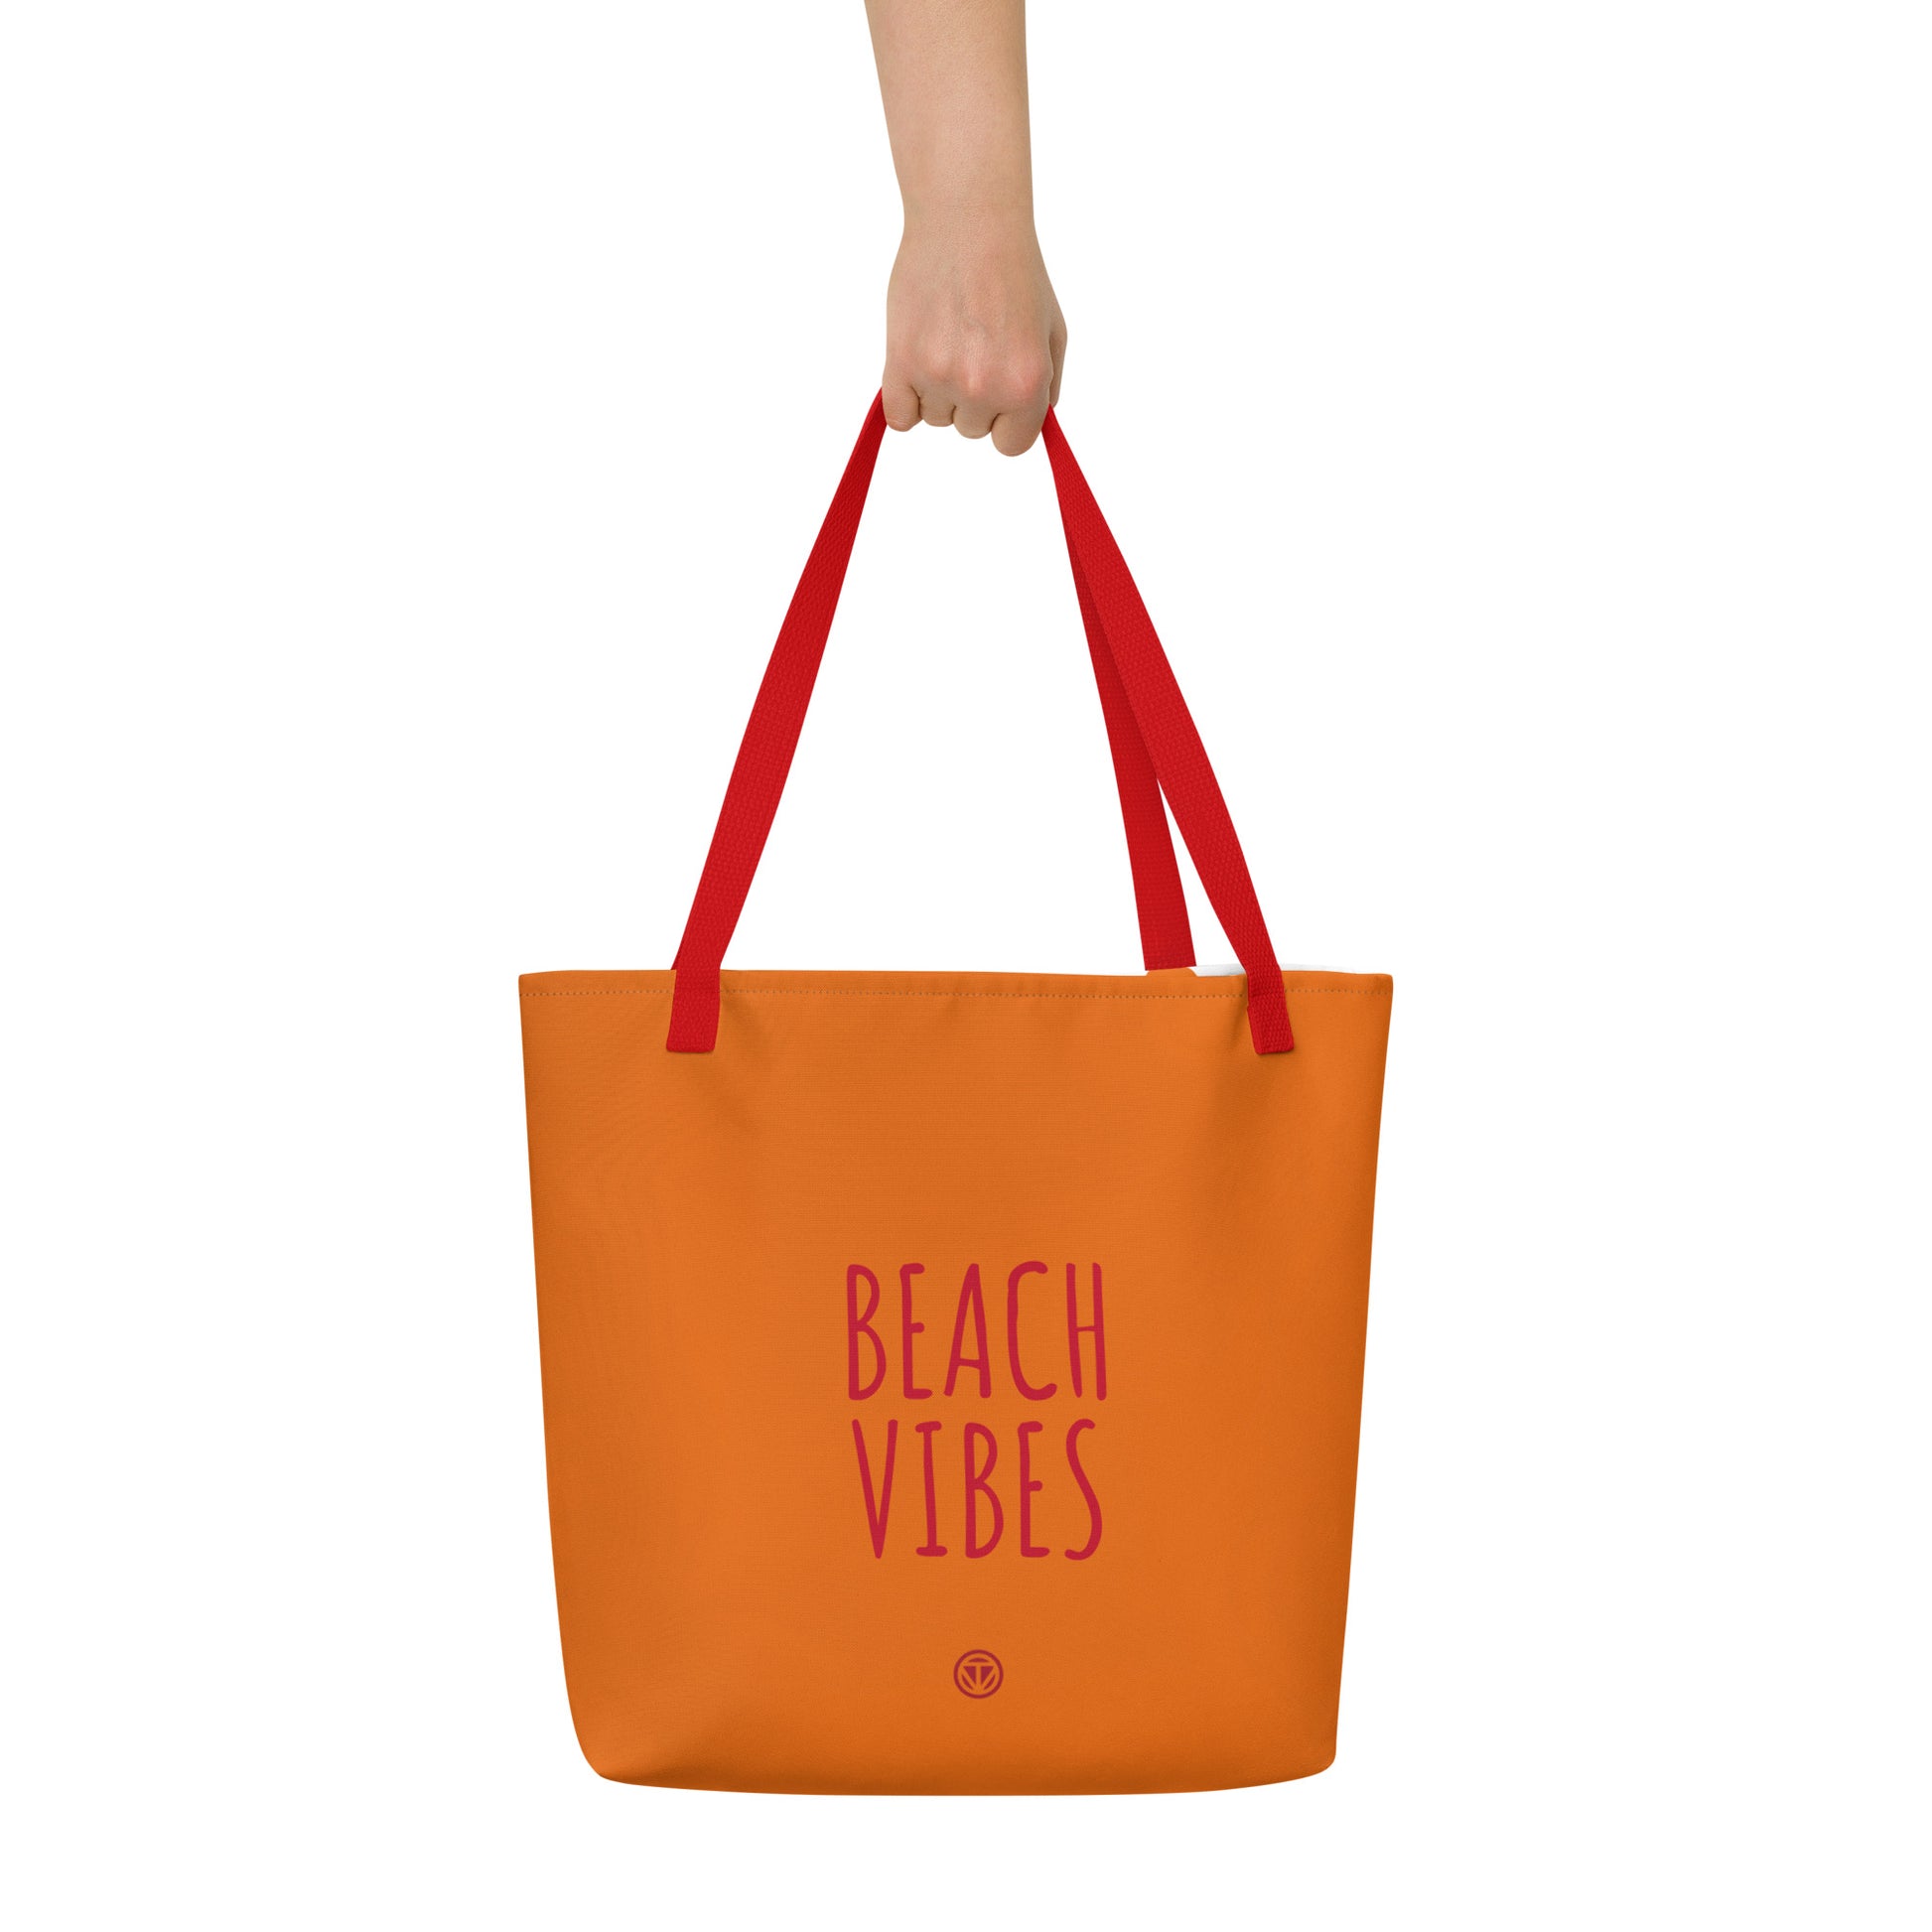 TIME OF VIBES - Large Tote Bag BEACH VIBES (Orange) - €45.00